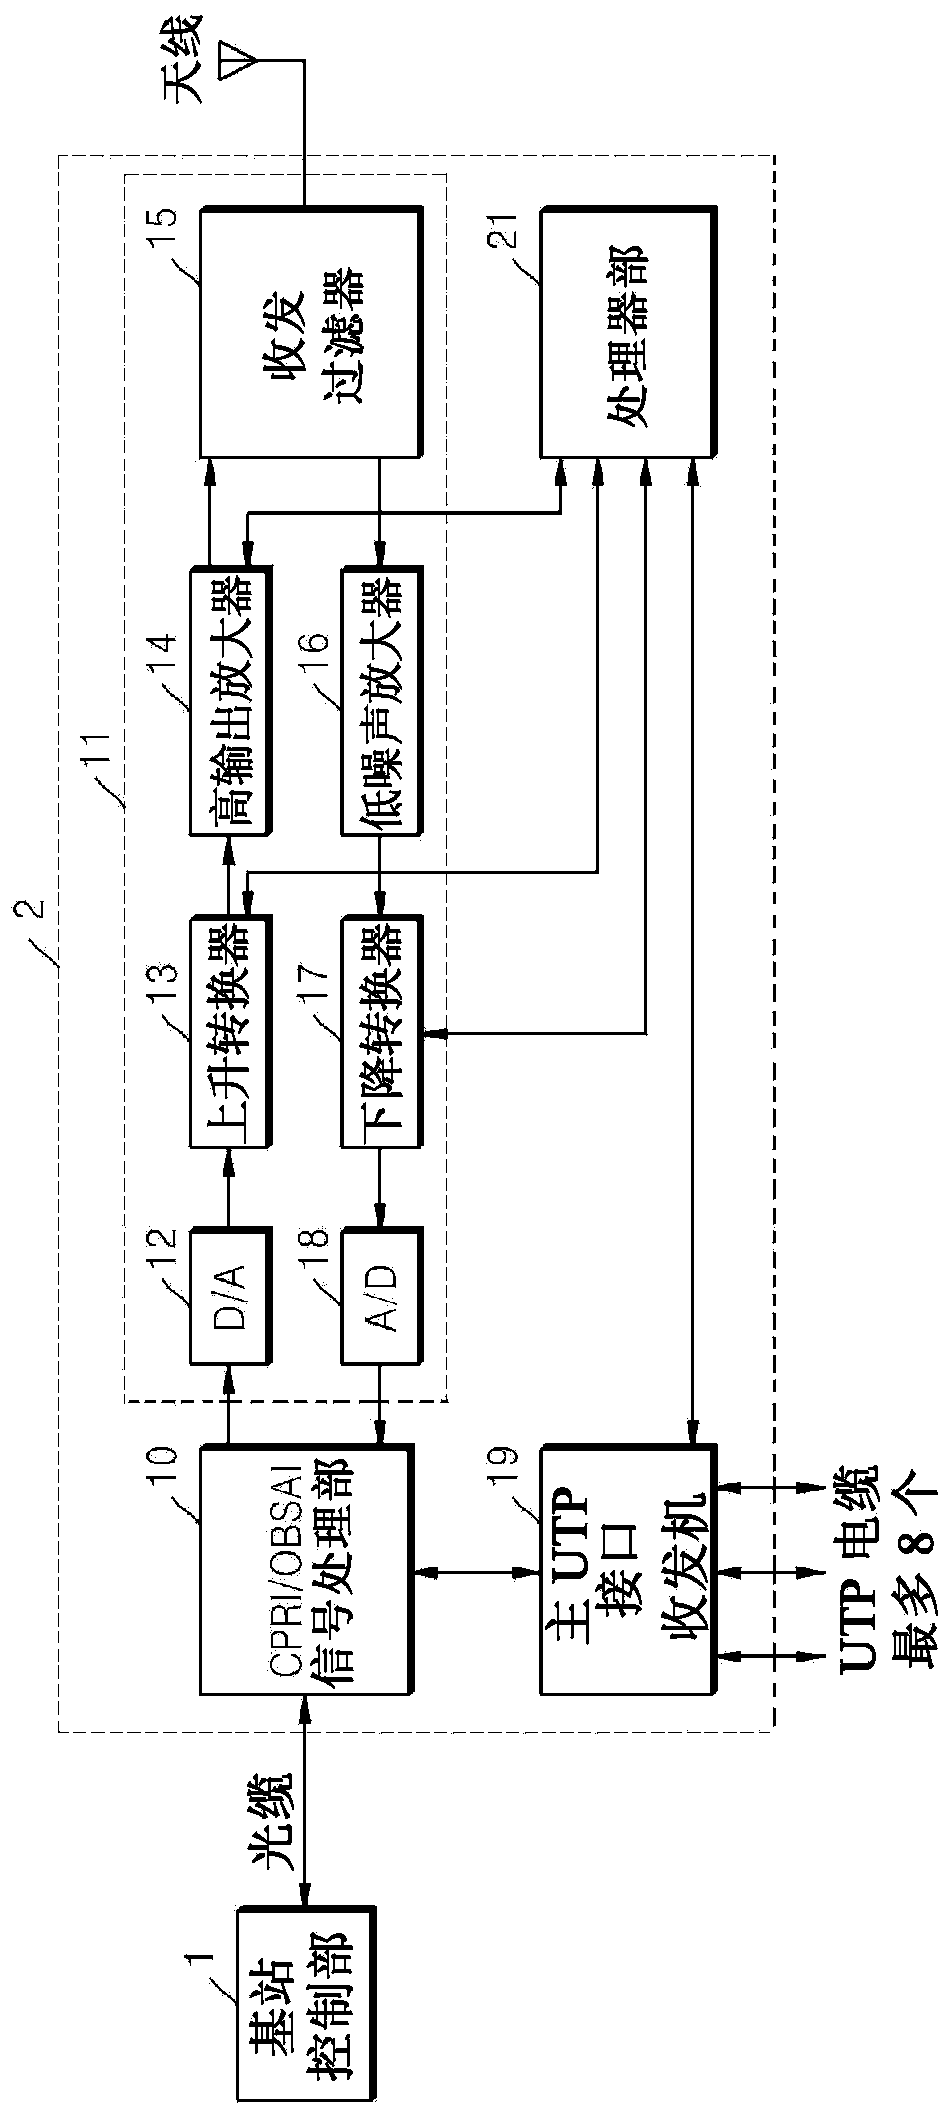 Remote wireless base station device having in-house expandability and in-building relay system